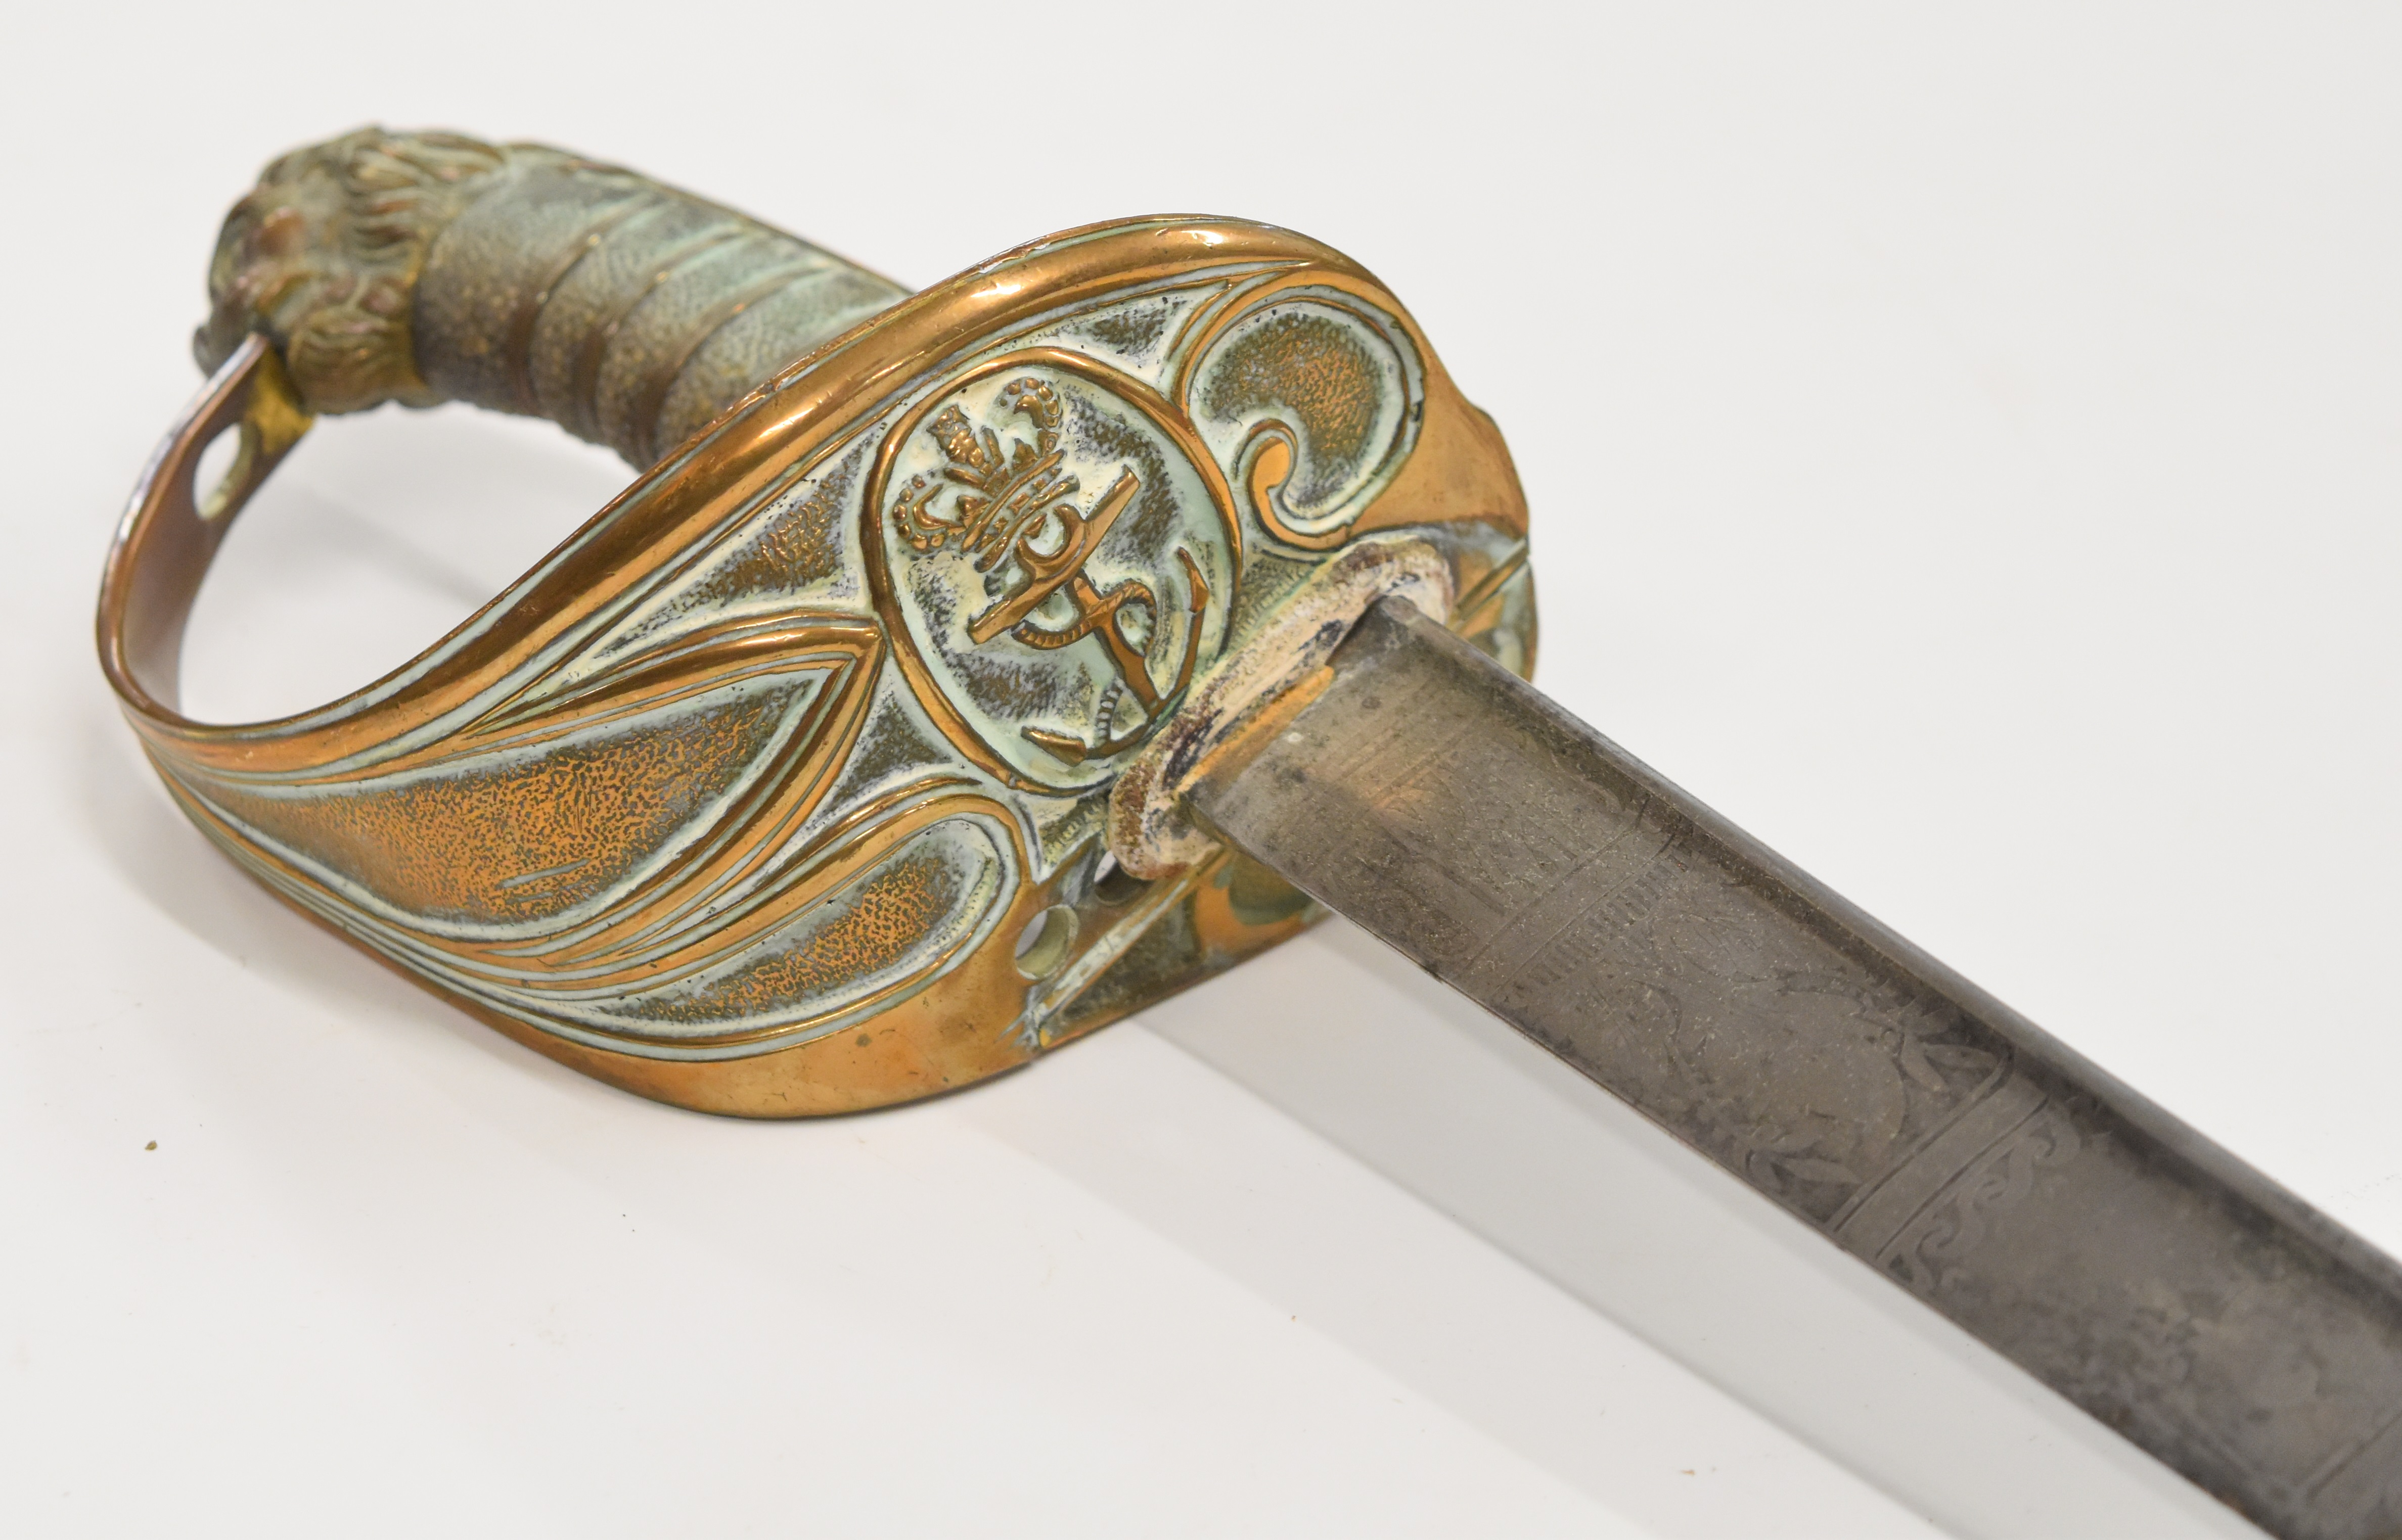 Royal Navy 1827 pattern sword with lion head pommel, folding inner guard and fouled anchor motif, - Image 4 of 11